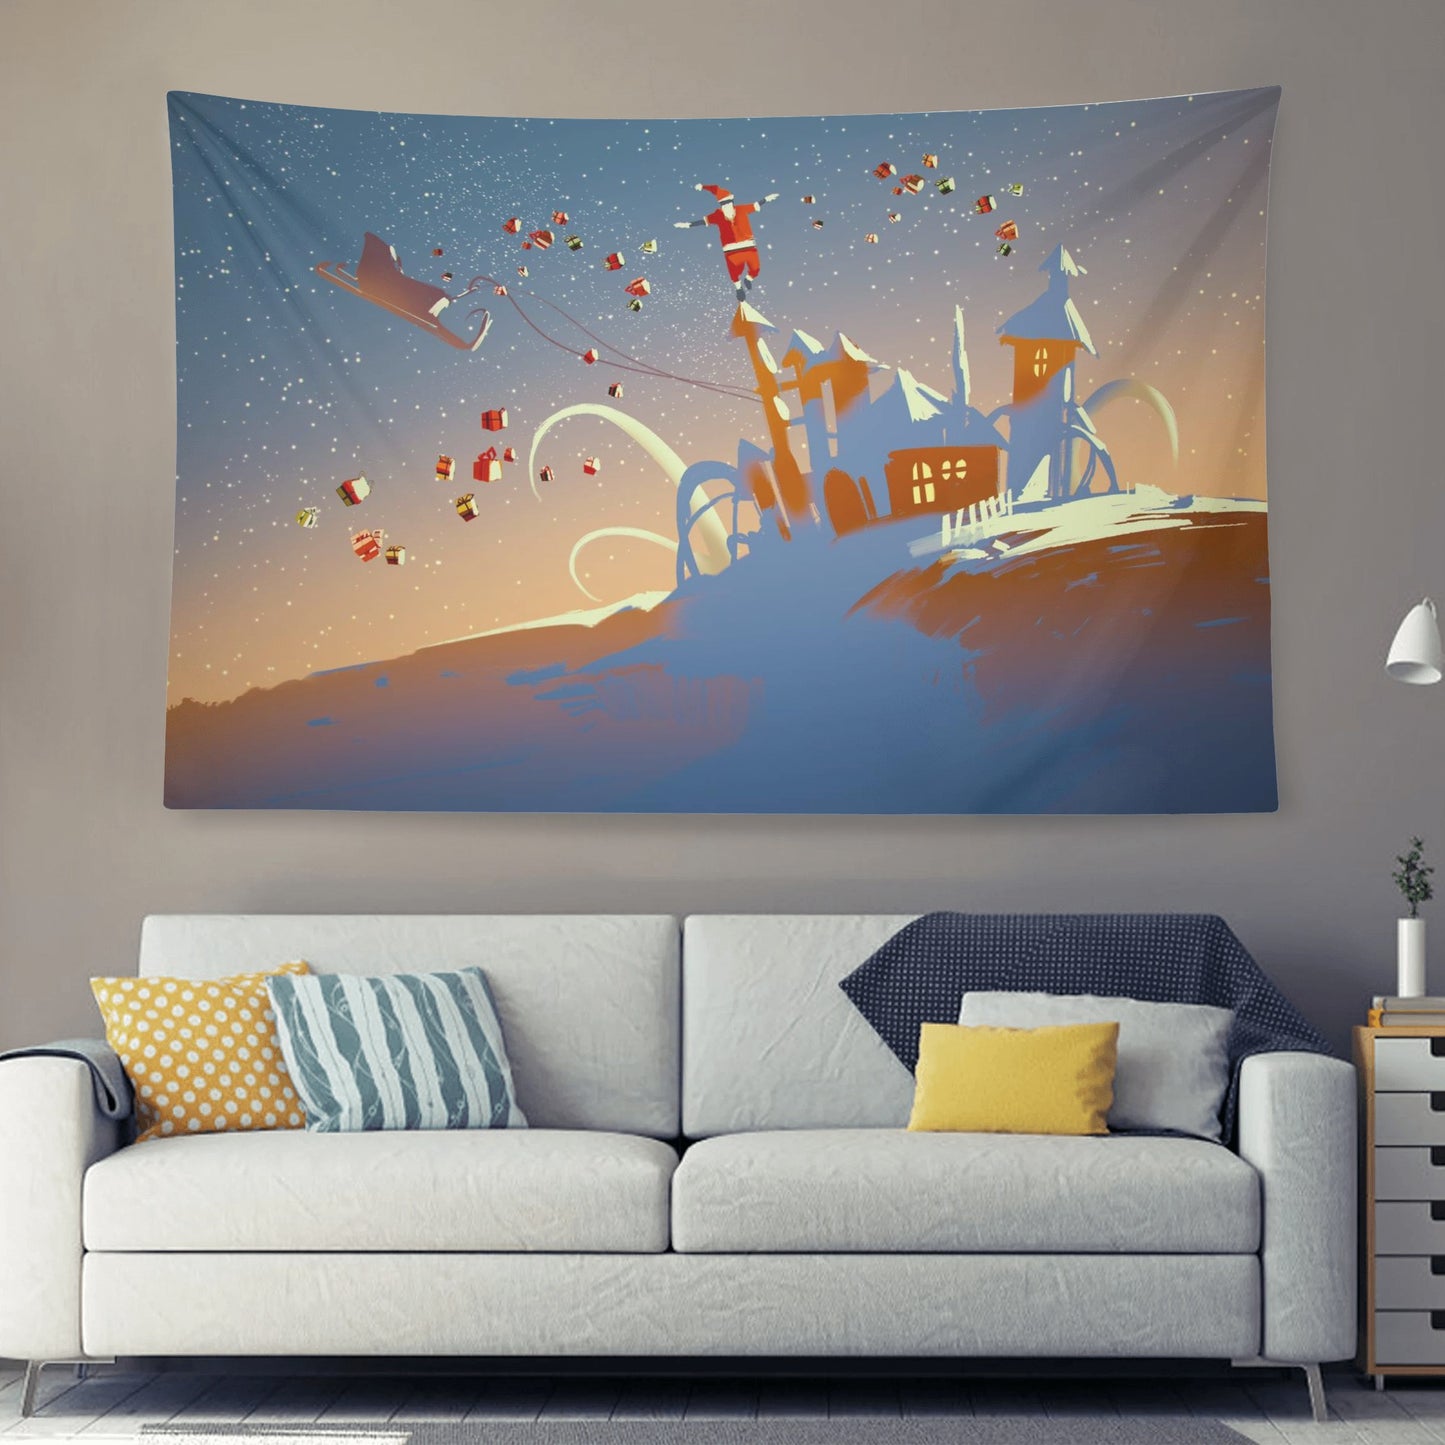 Santa Is Coming With This Polyester Peach Skin Wall Tapestry 6 Sizes